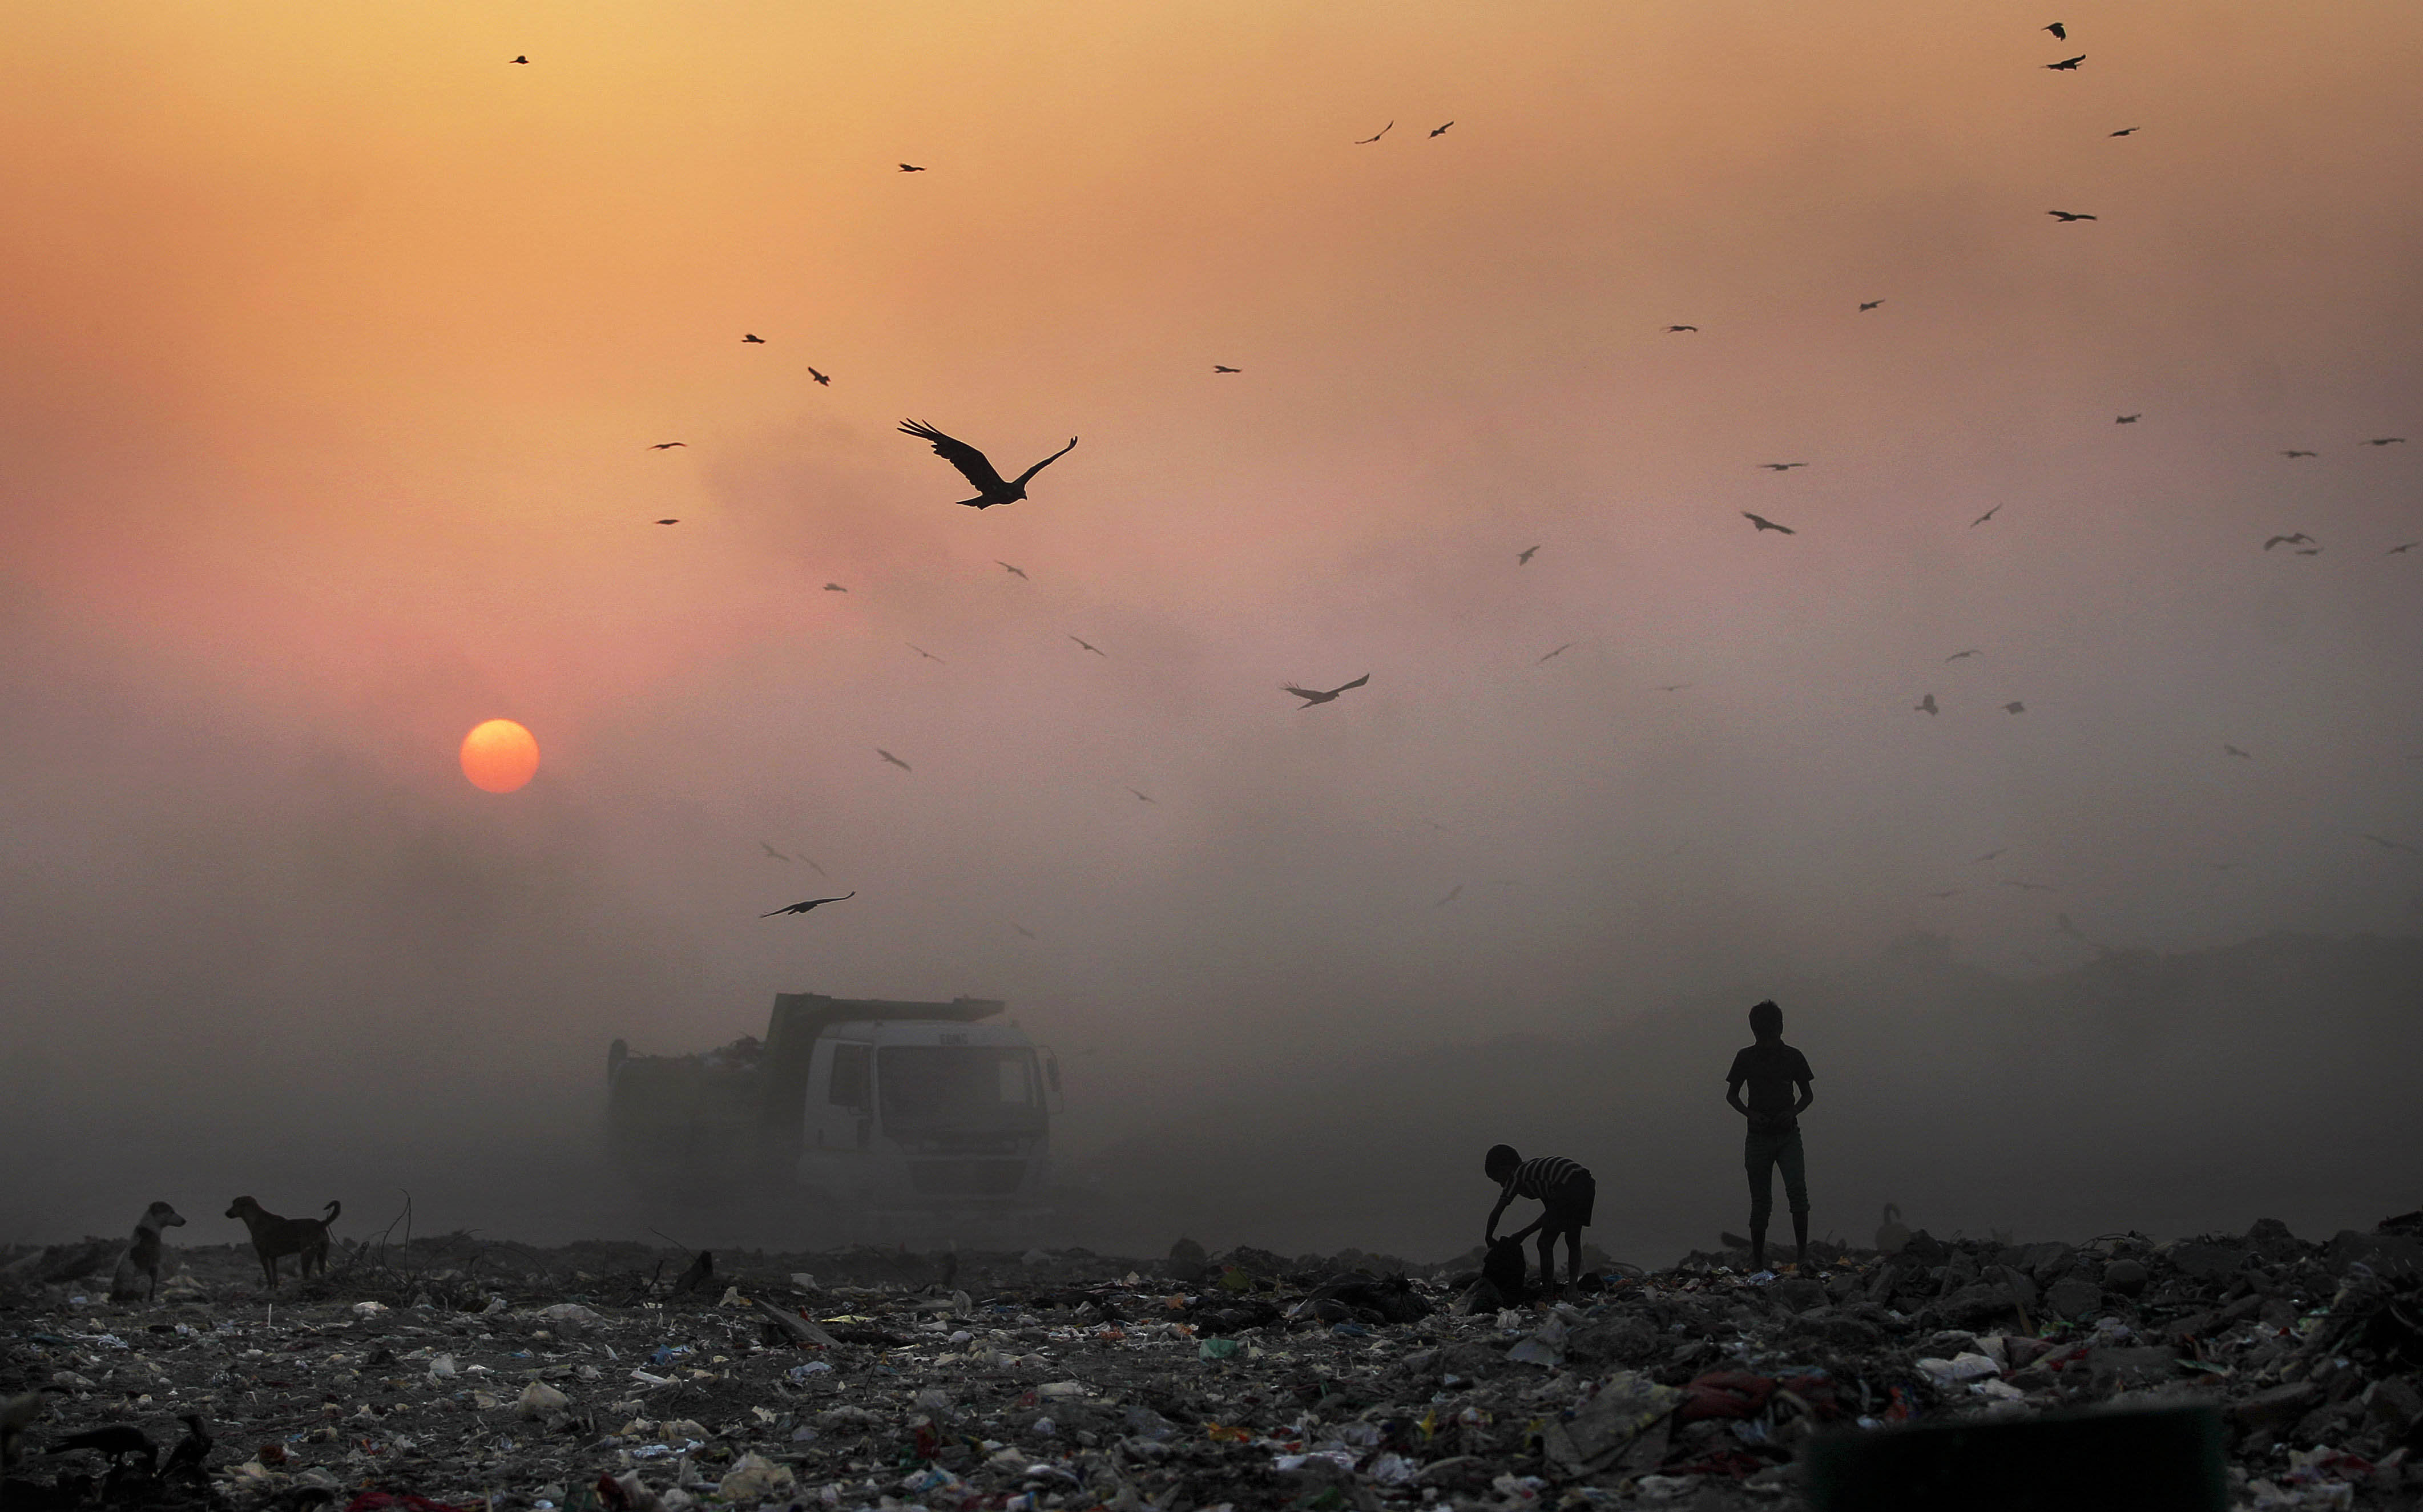 FILE- In this Oct. 17, 2014, file photo, a thick blanket of smoke is seen against the setting sun as young ragpickers search for reusable material at a garbage dump in New Delhi, India. New Delhi city is imposing new rules to reduce its notoriously snarled traffic and fight extreme air pollution that has earned India’s capital the title of world's most polluted city. (AP Photo/Altaf Qadri)